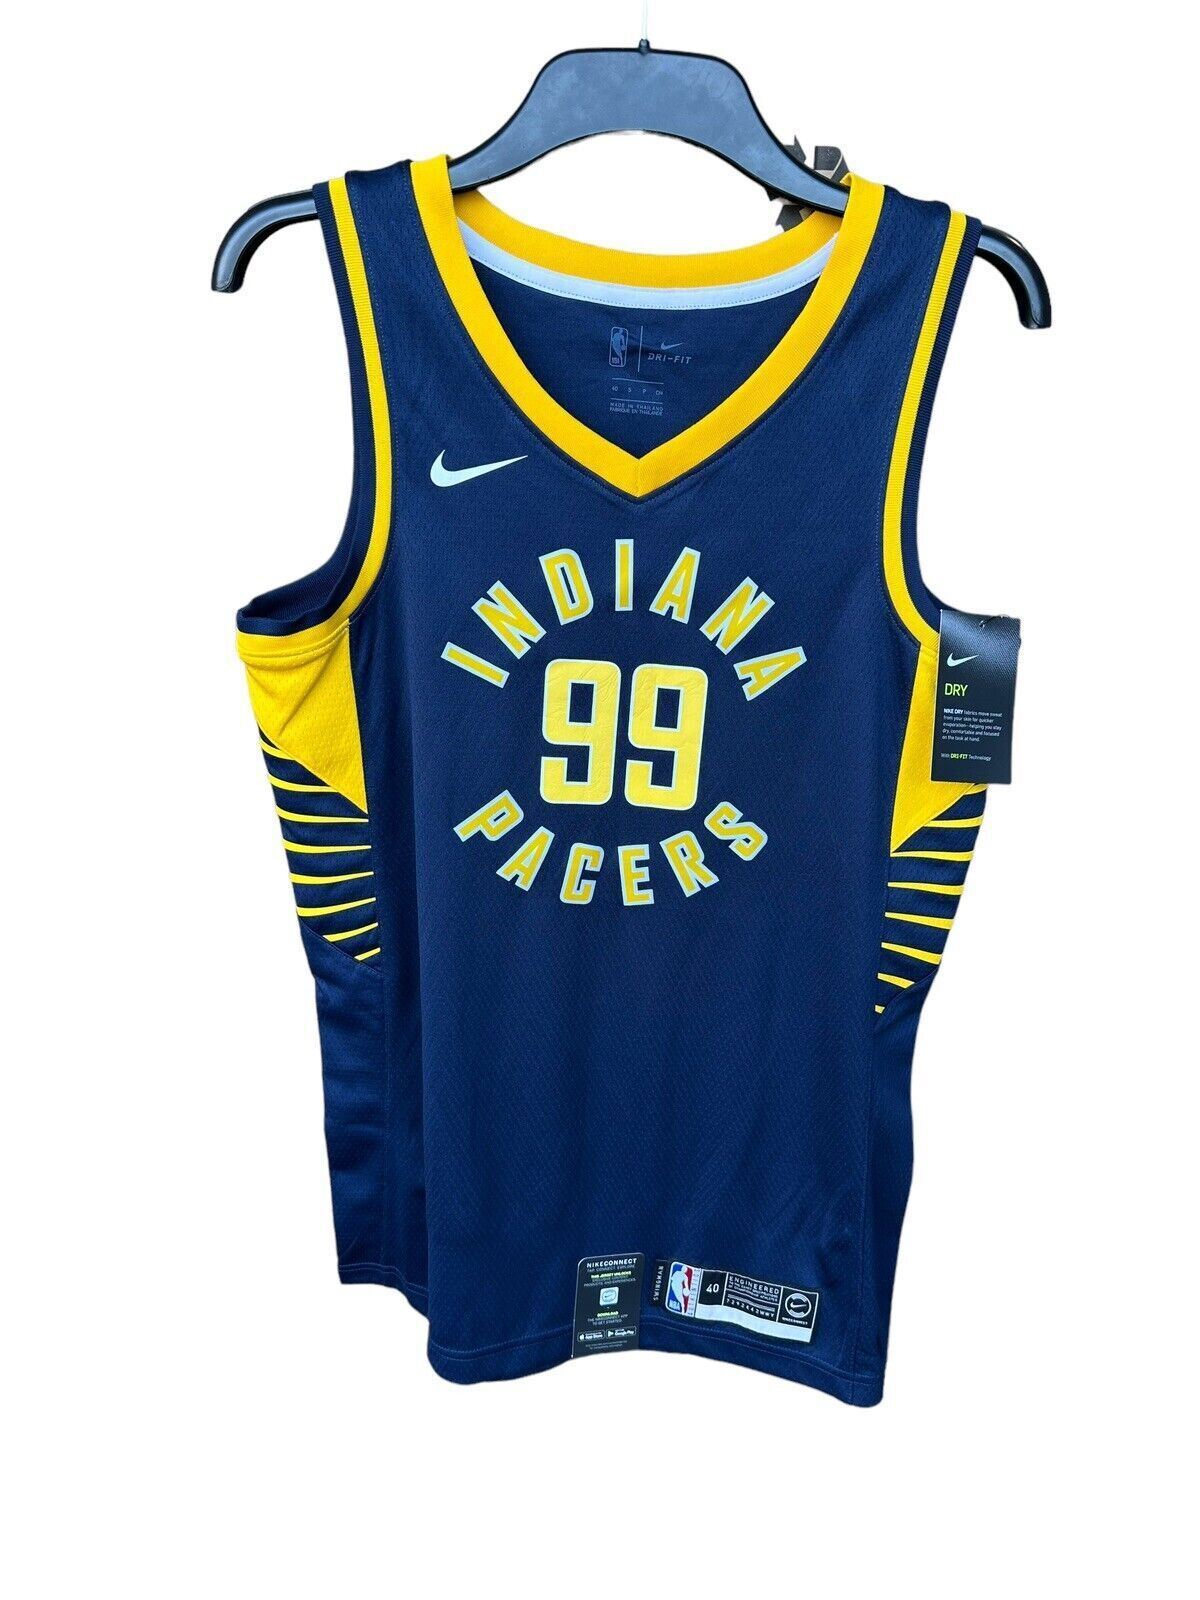 Nike NBA Indians Pacers Swingman Edition Jersey RUBIO 99 Mens Small